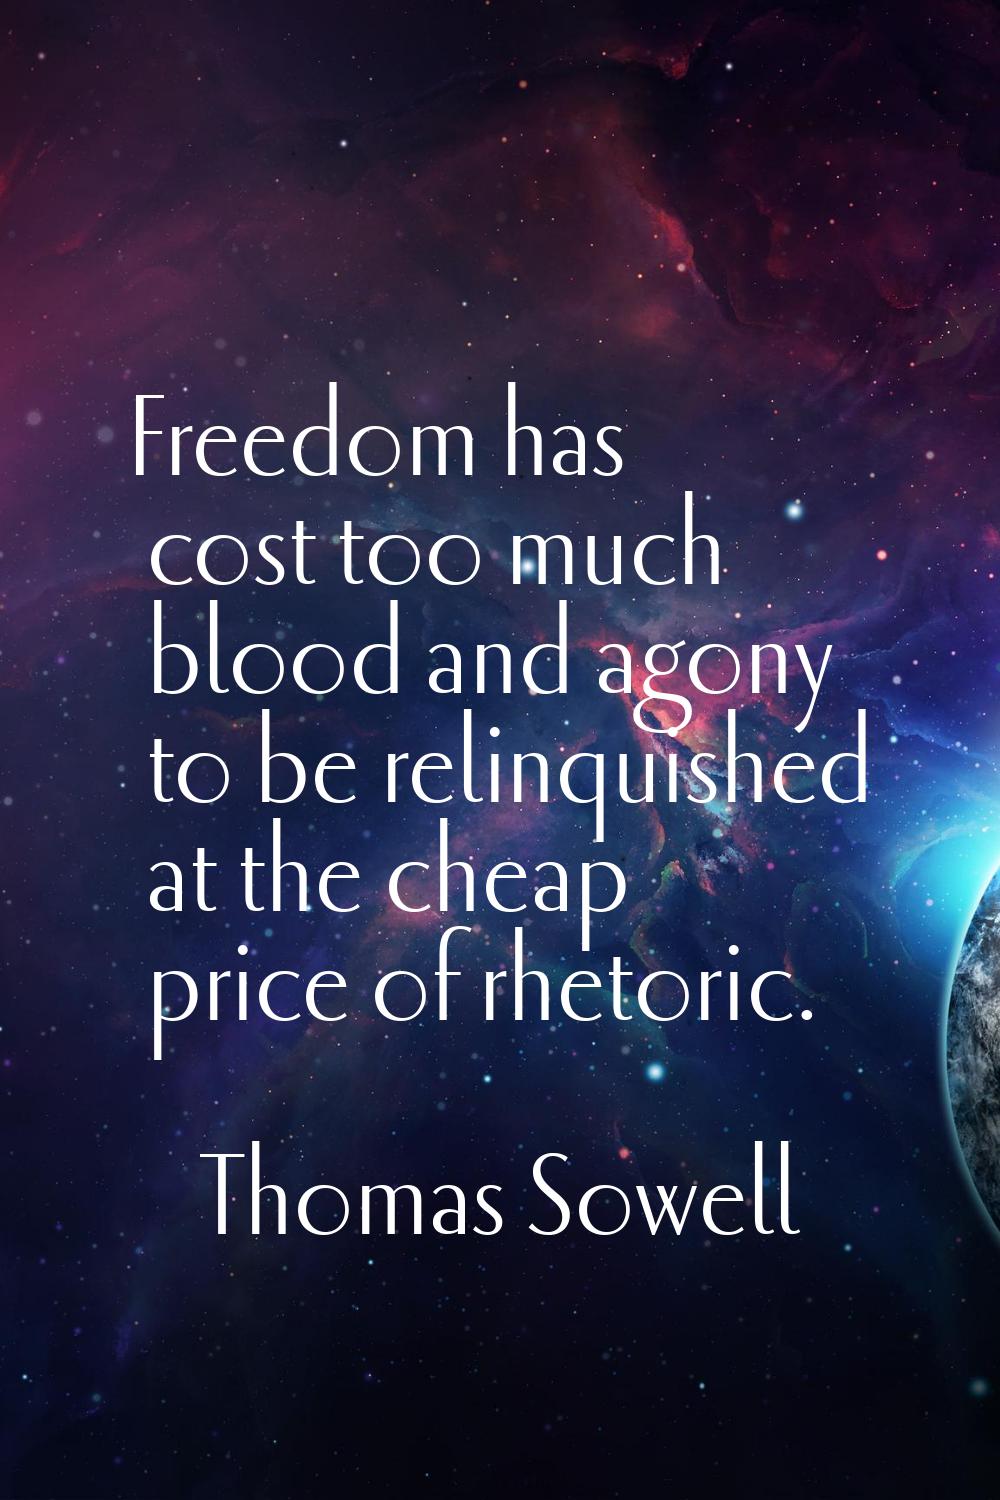 Freedom has cost too much blood and agony to be relinquished at the cheap price of rhetoric.